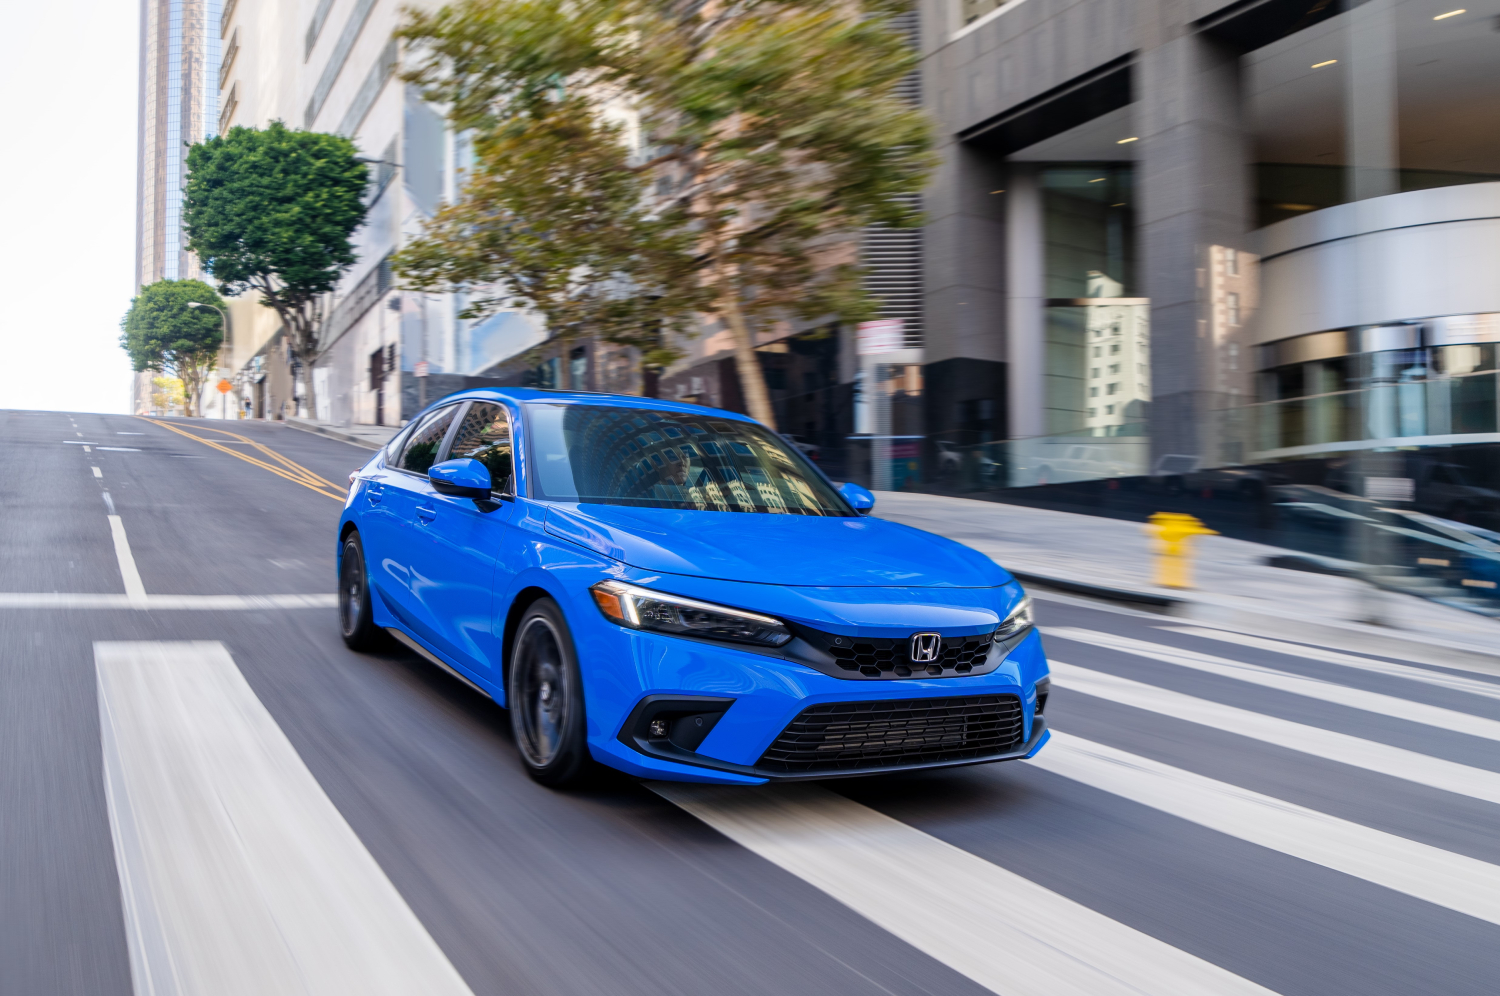 The Honda Civic Hatchback is one of Consumer Reports fun cars to drive